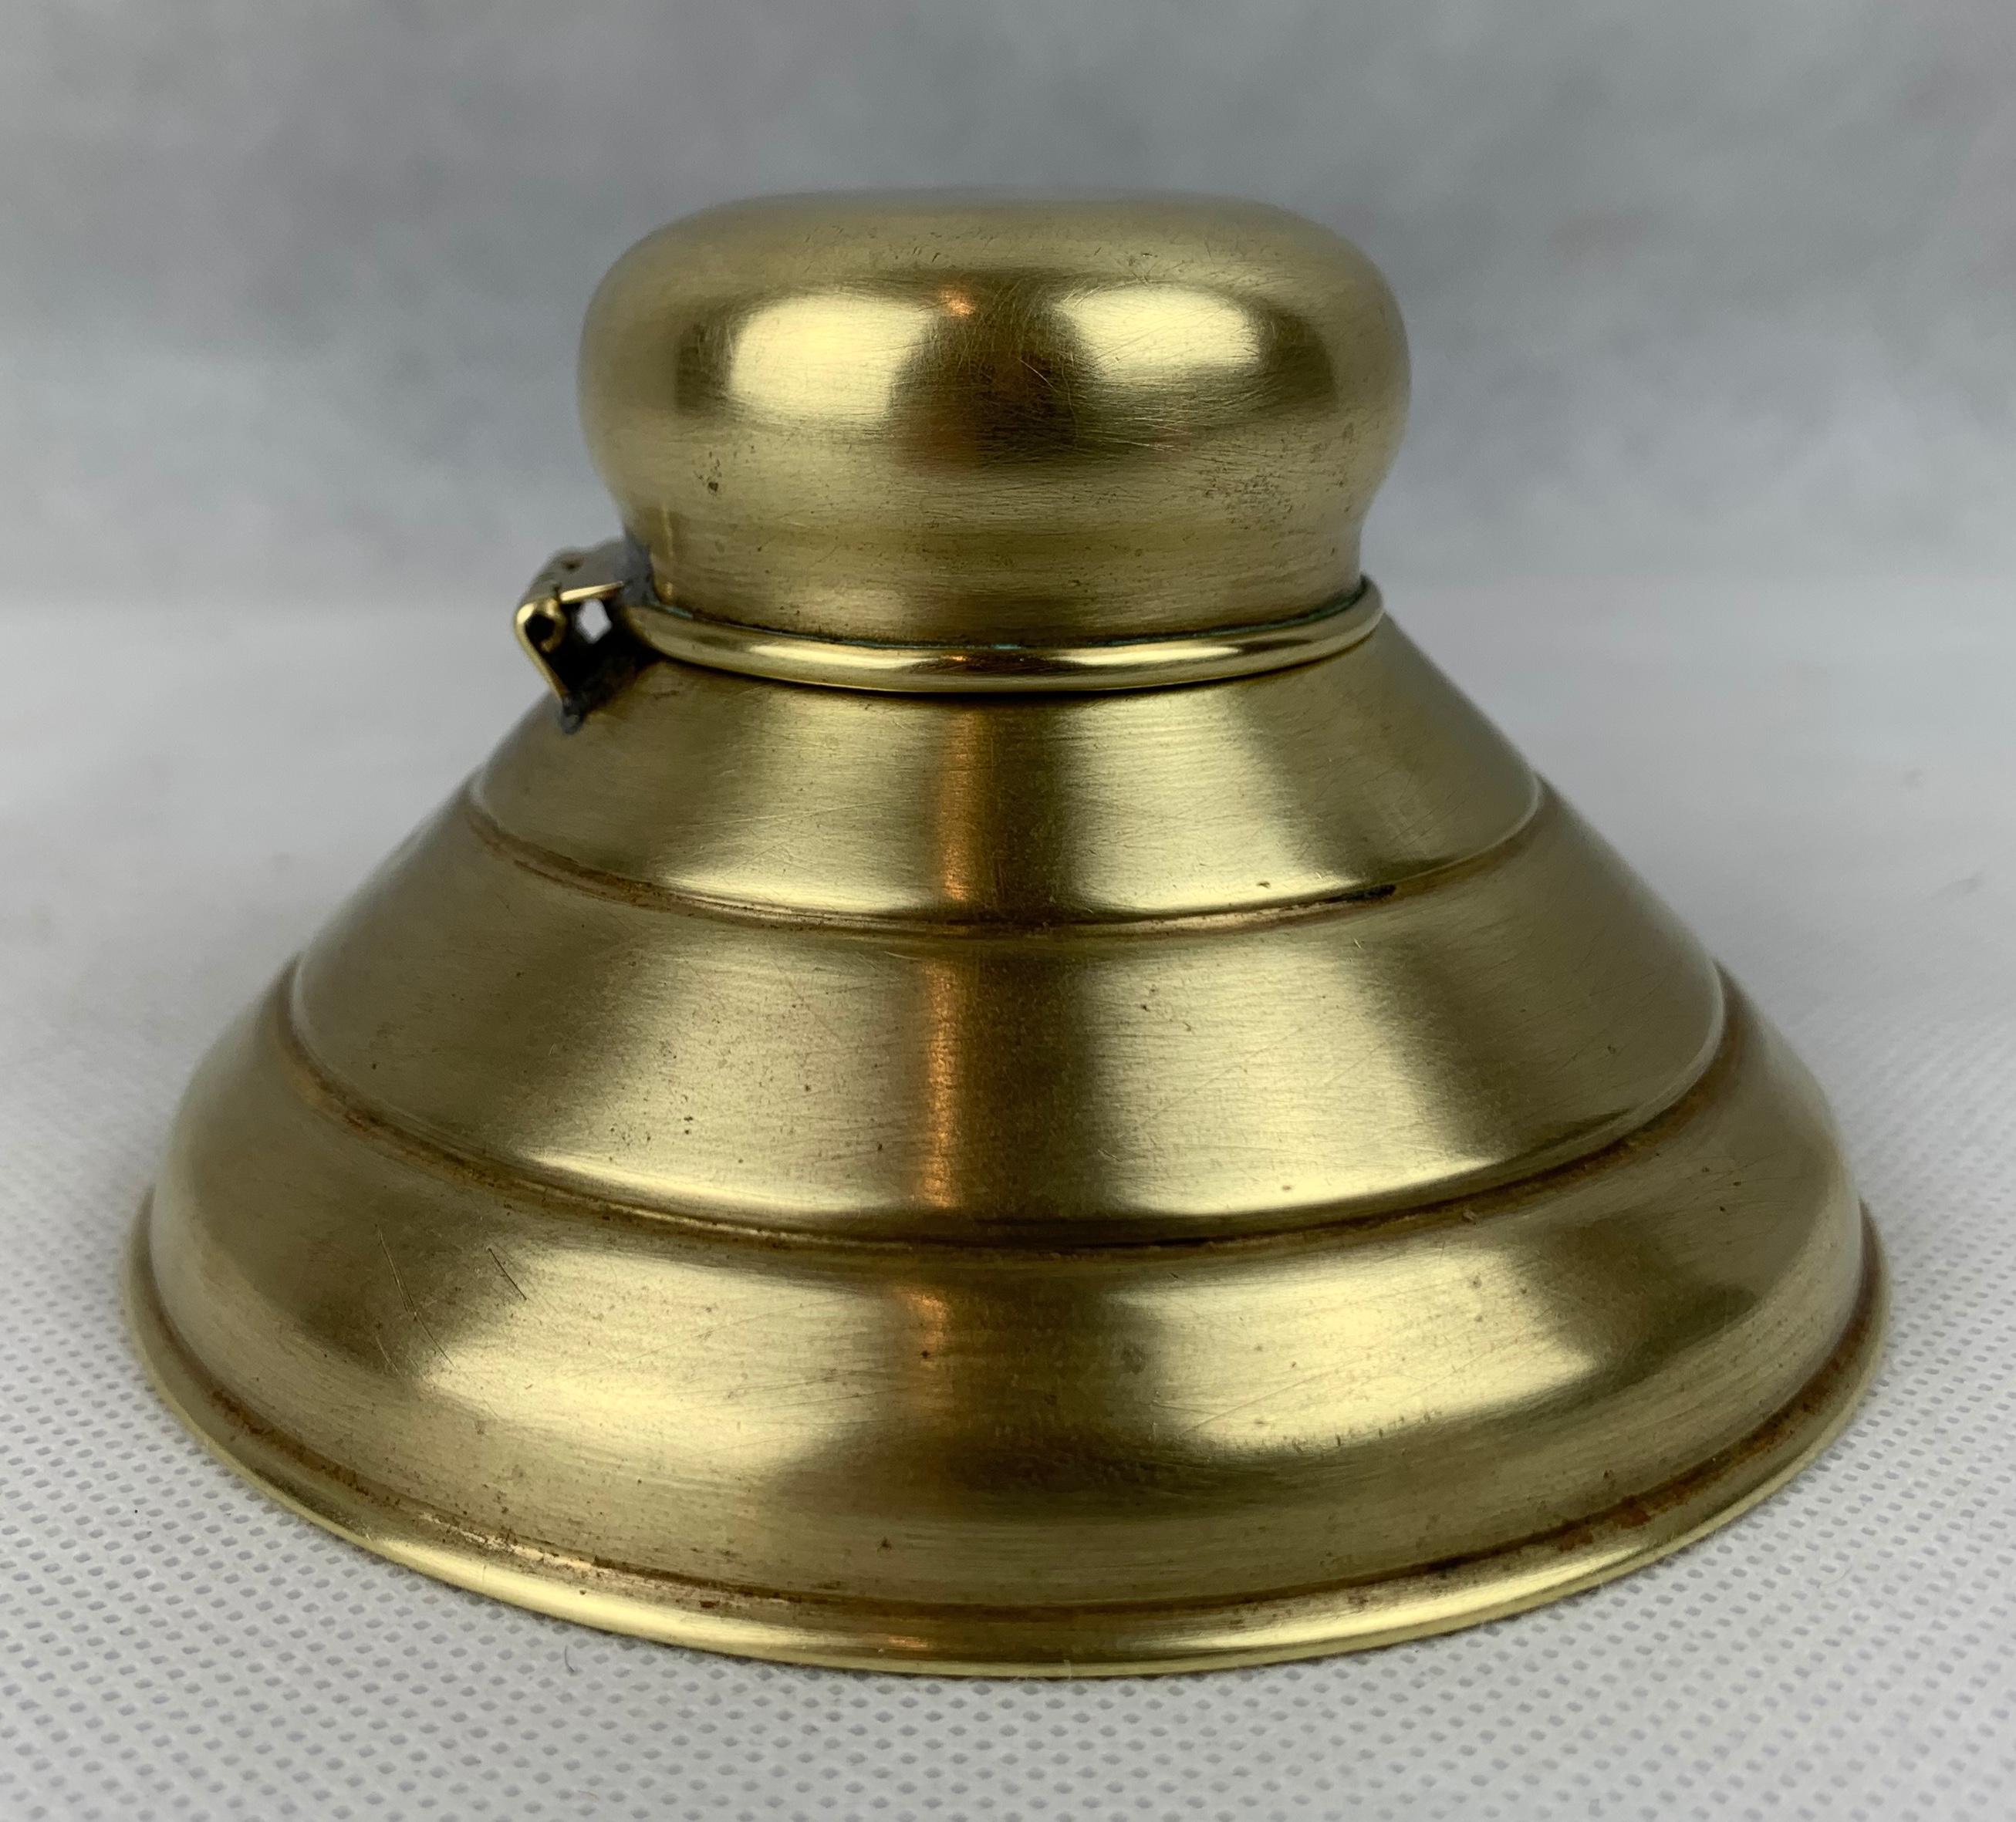 Futurist early 20th century American hinged brass inkwell. The domed top and three sectioned bottom gives this inkwell a surprisingly futuristic look almost like a flying saucer.
Polished by hand in our workshop.   (We go through the laborious task